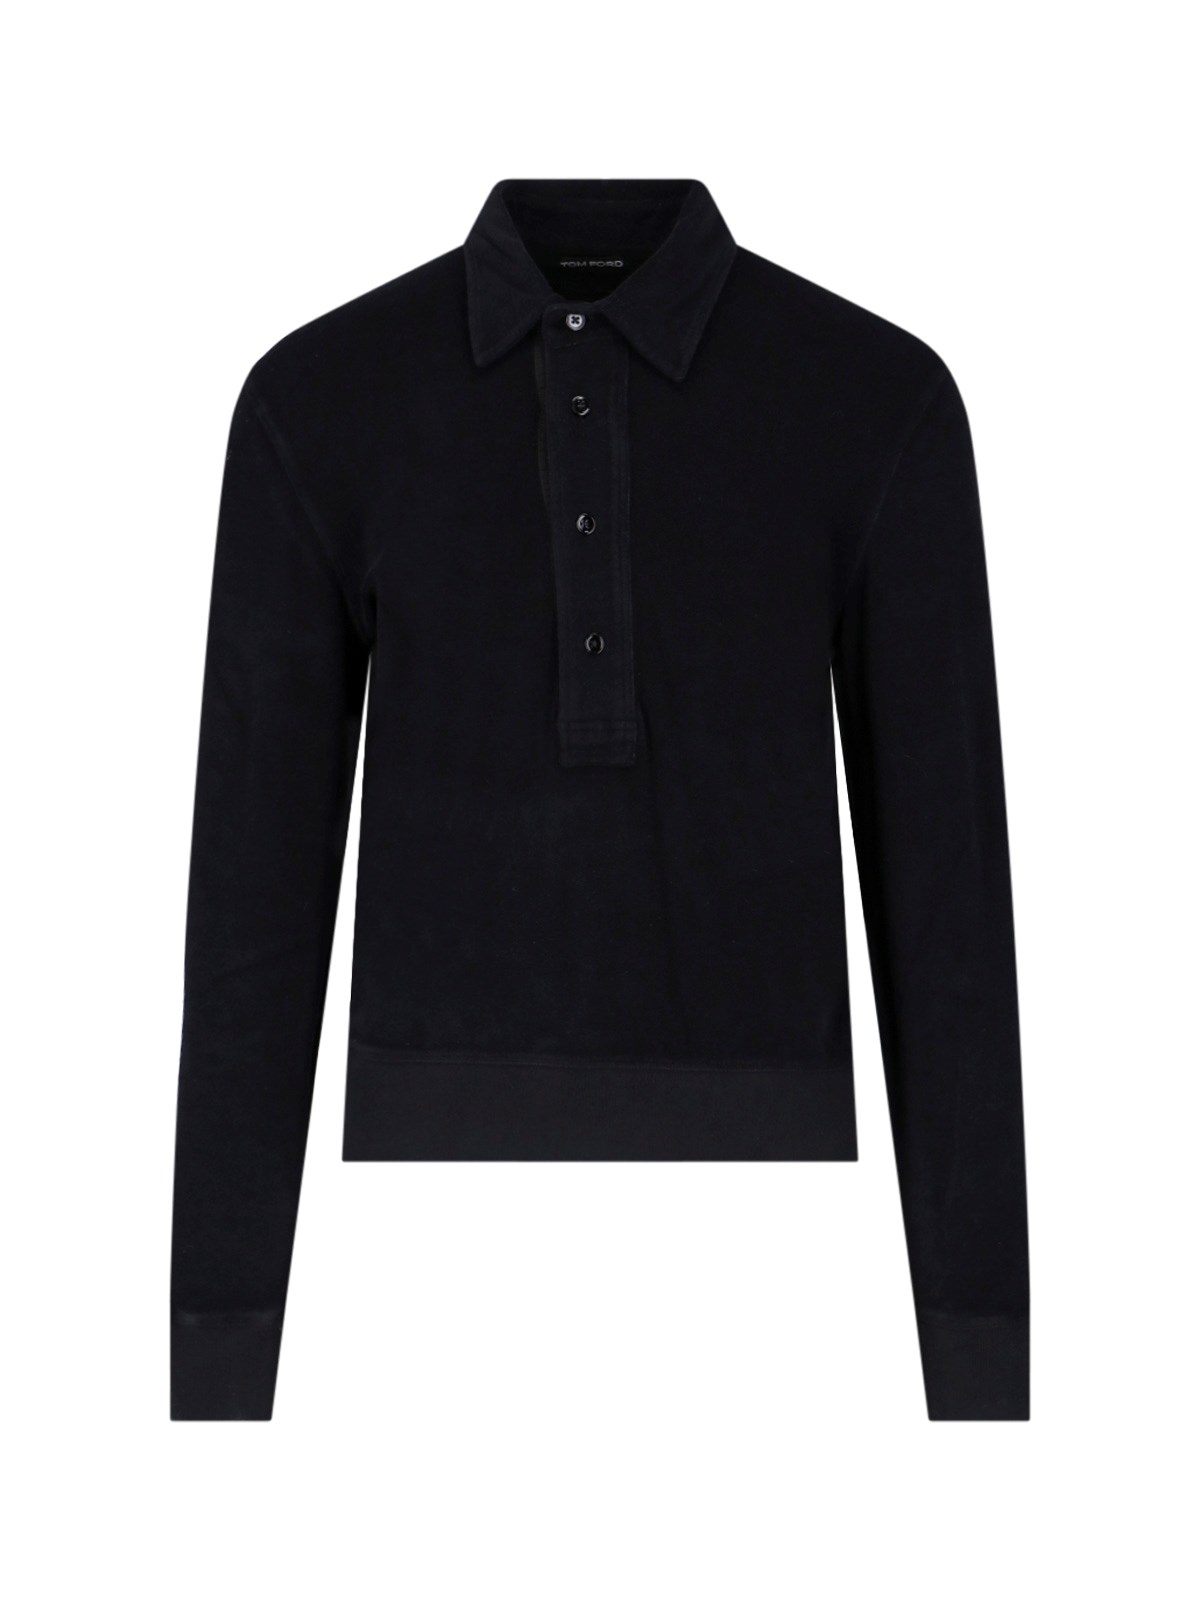 TOM FORD POLO SWEATER